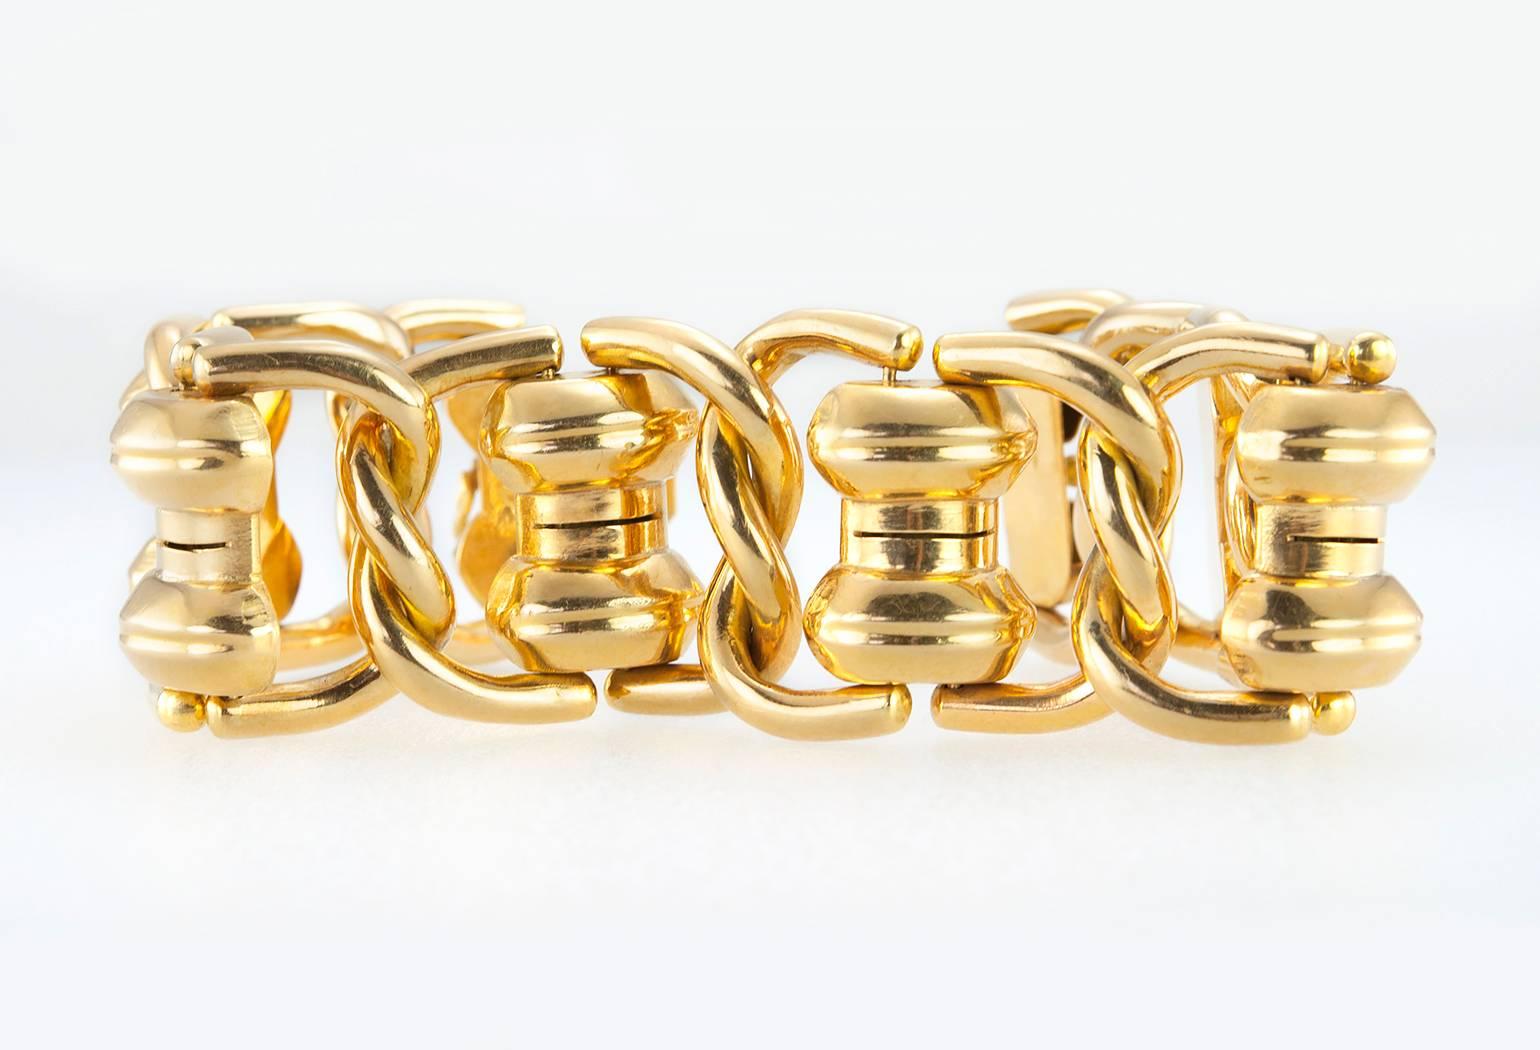 A cool, thick and chunky gold link bracelet in 18 karat yellow gold.  This 1960s bracelet has large links and open spaces that looks fabulous on!  

The bracelet measures approximately 7.5 inches in length, 1.20 inches in width, and 0.30 inches in